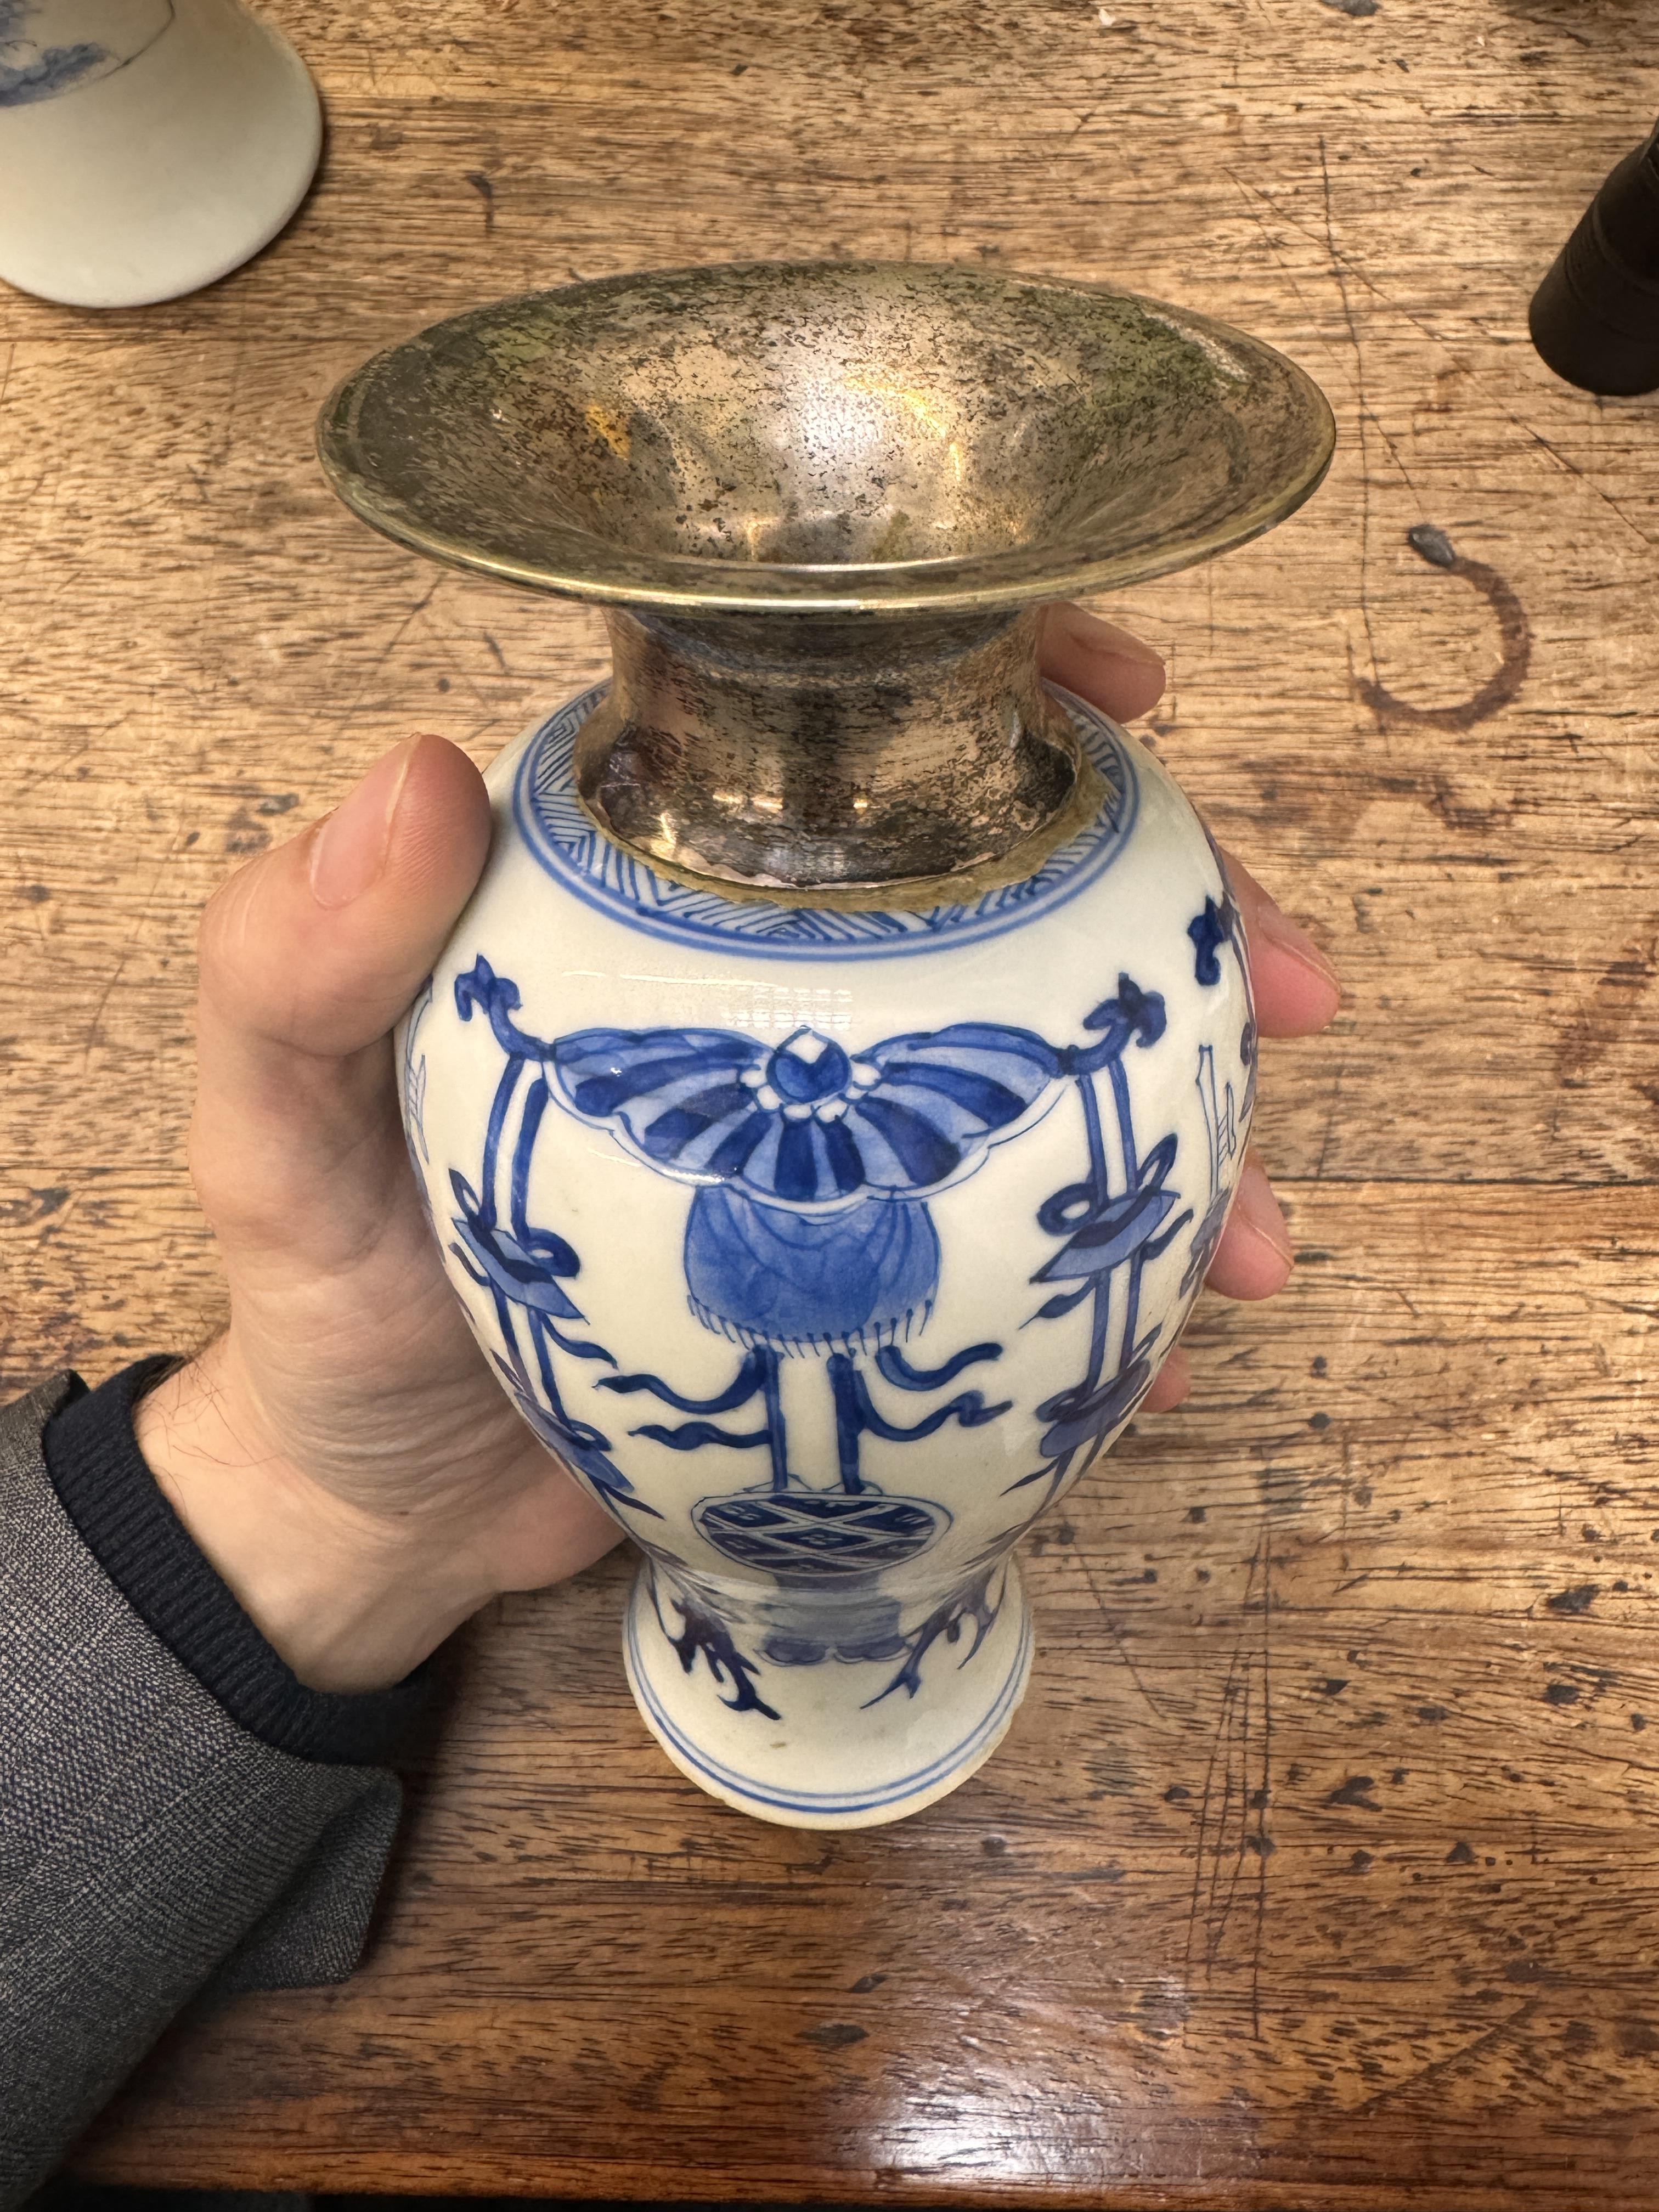 A CHINESE BLUE AND WHITE VASE 清康熙 青花雙魚紋瓶 - Image 8 of 17